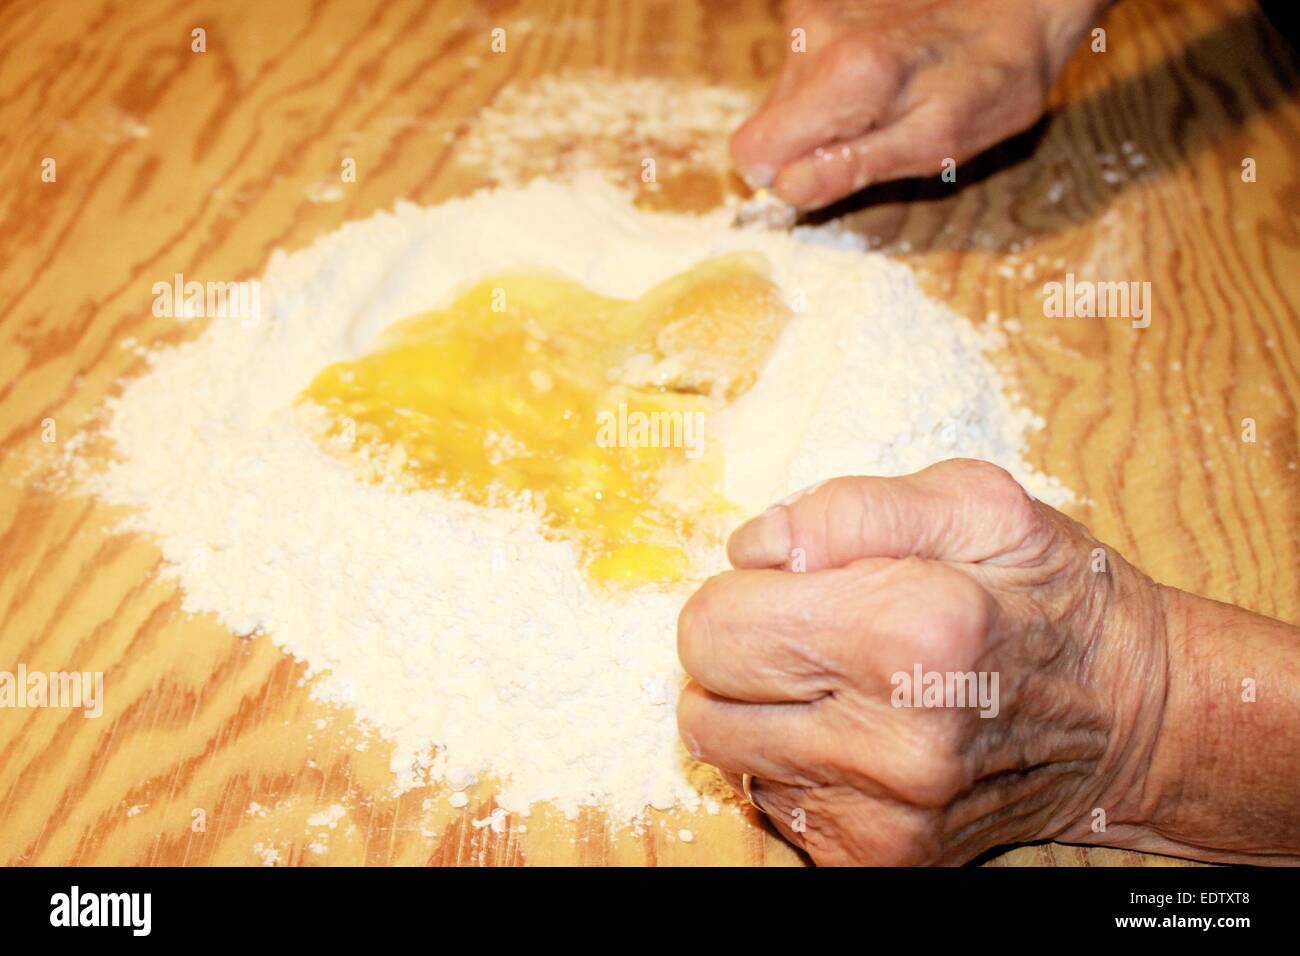 cooking fresh homemade pasta with egg and flour Stock Photo